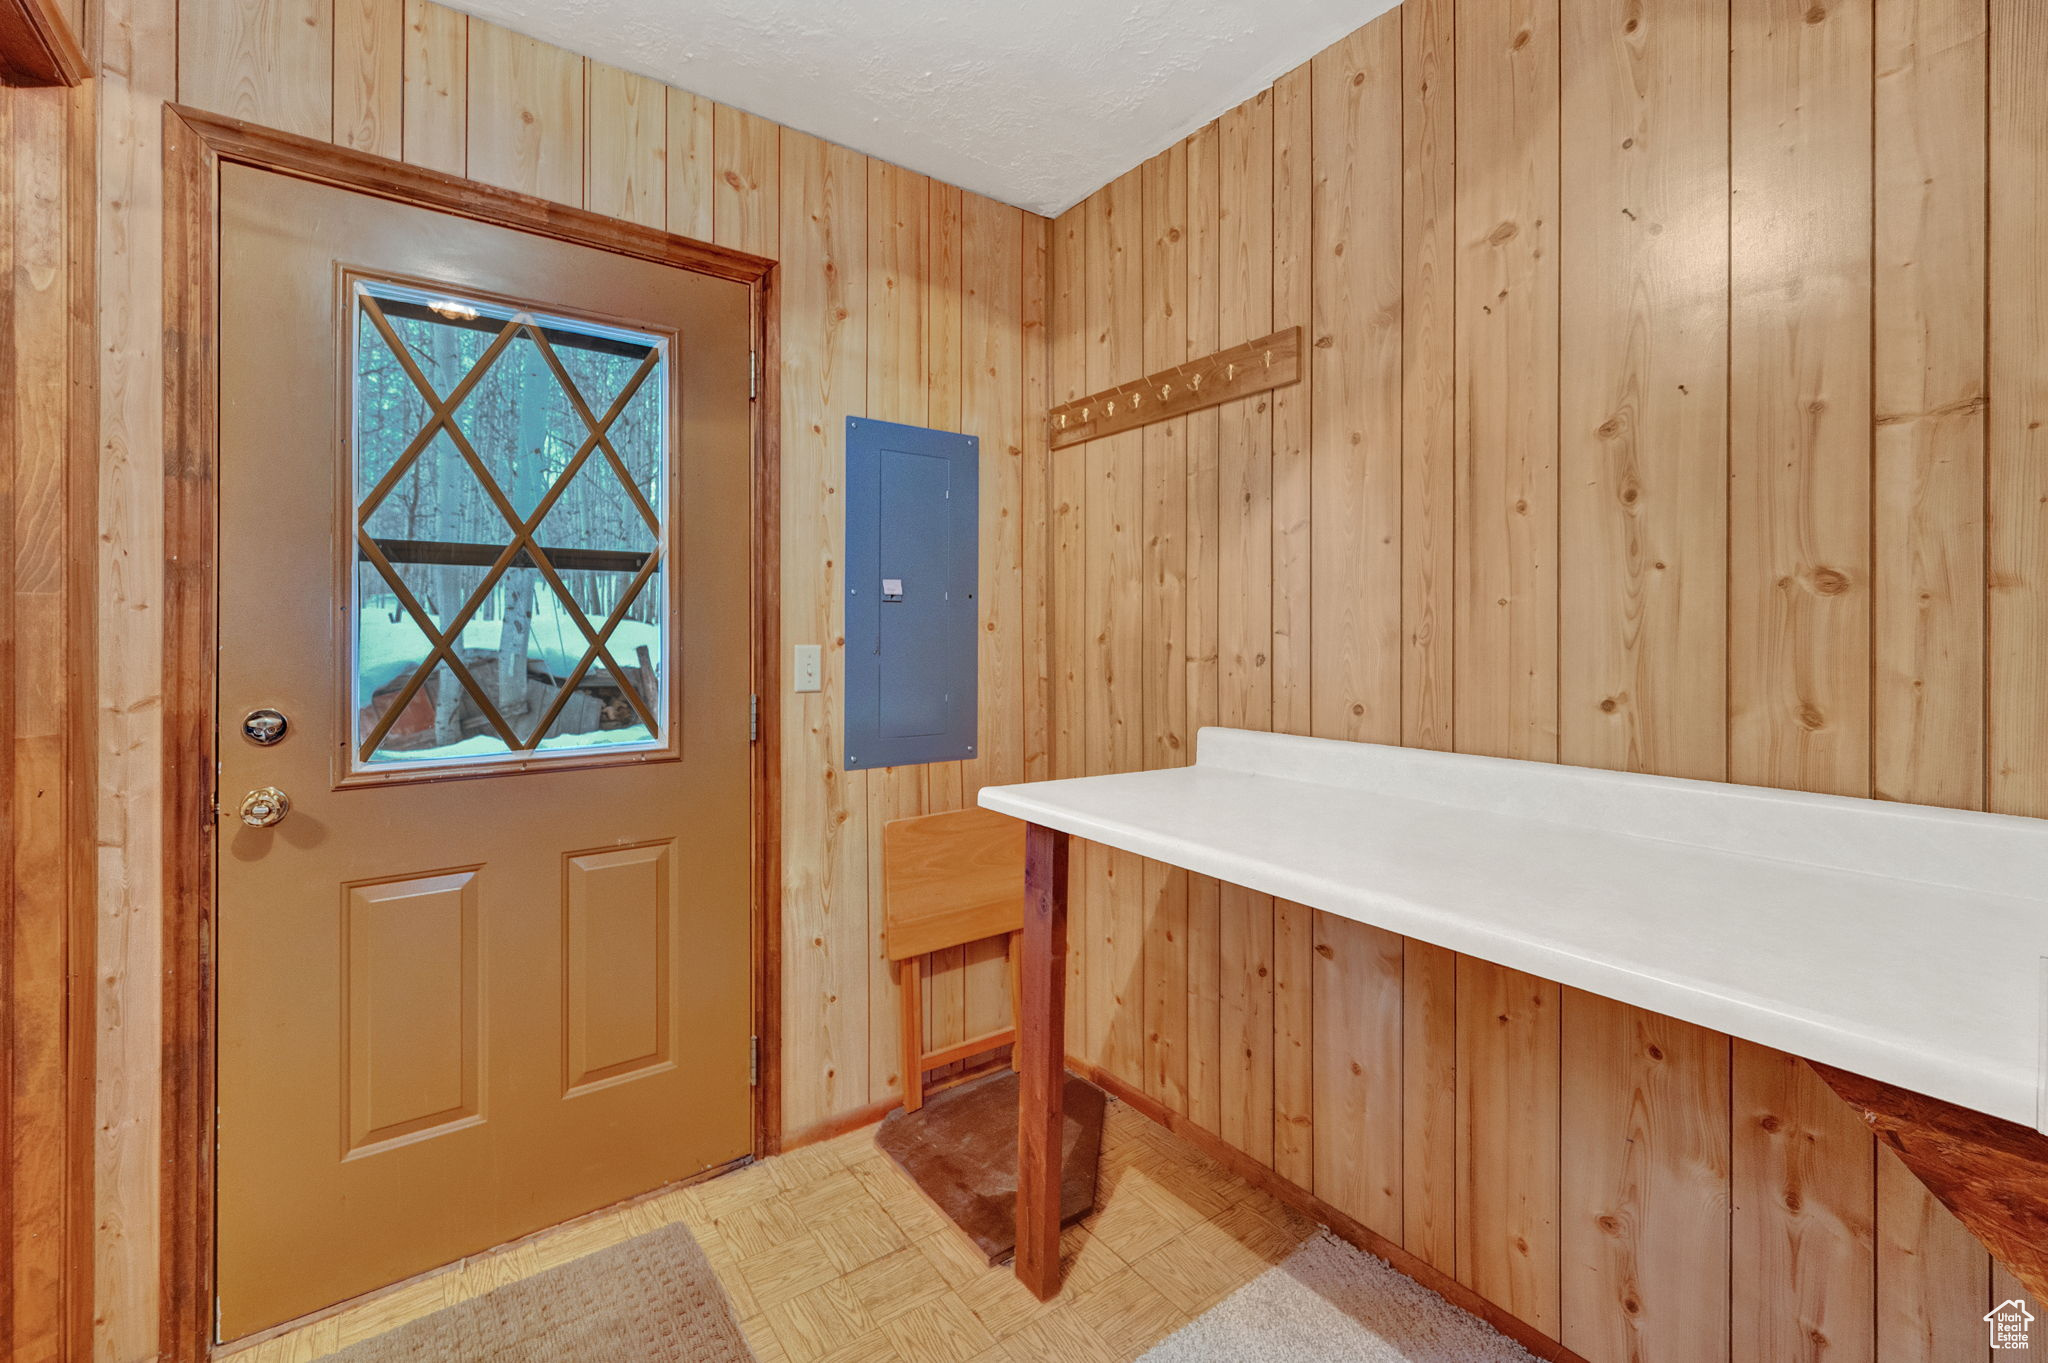 Entryway featuring wood walls